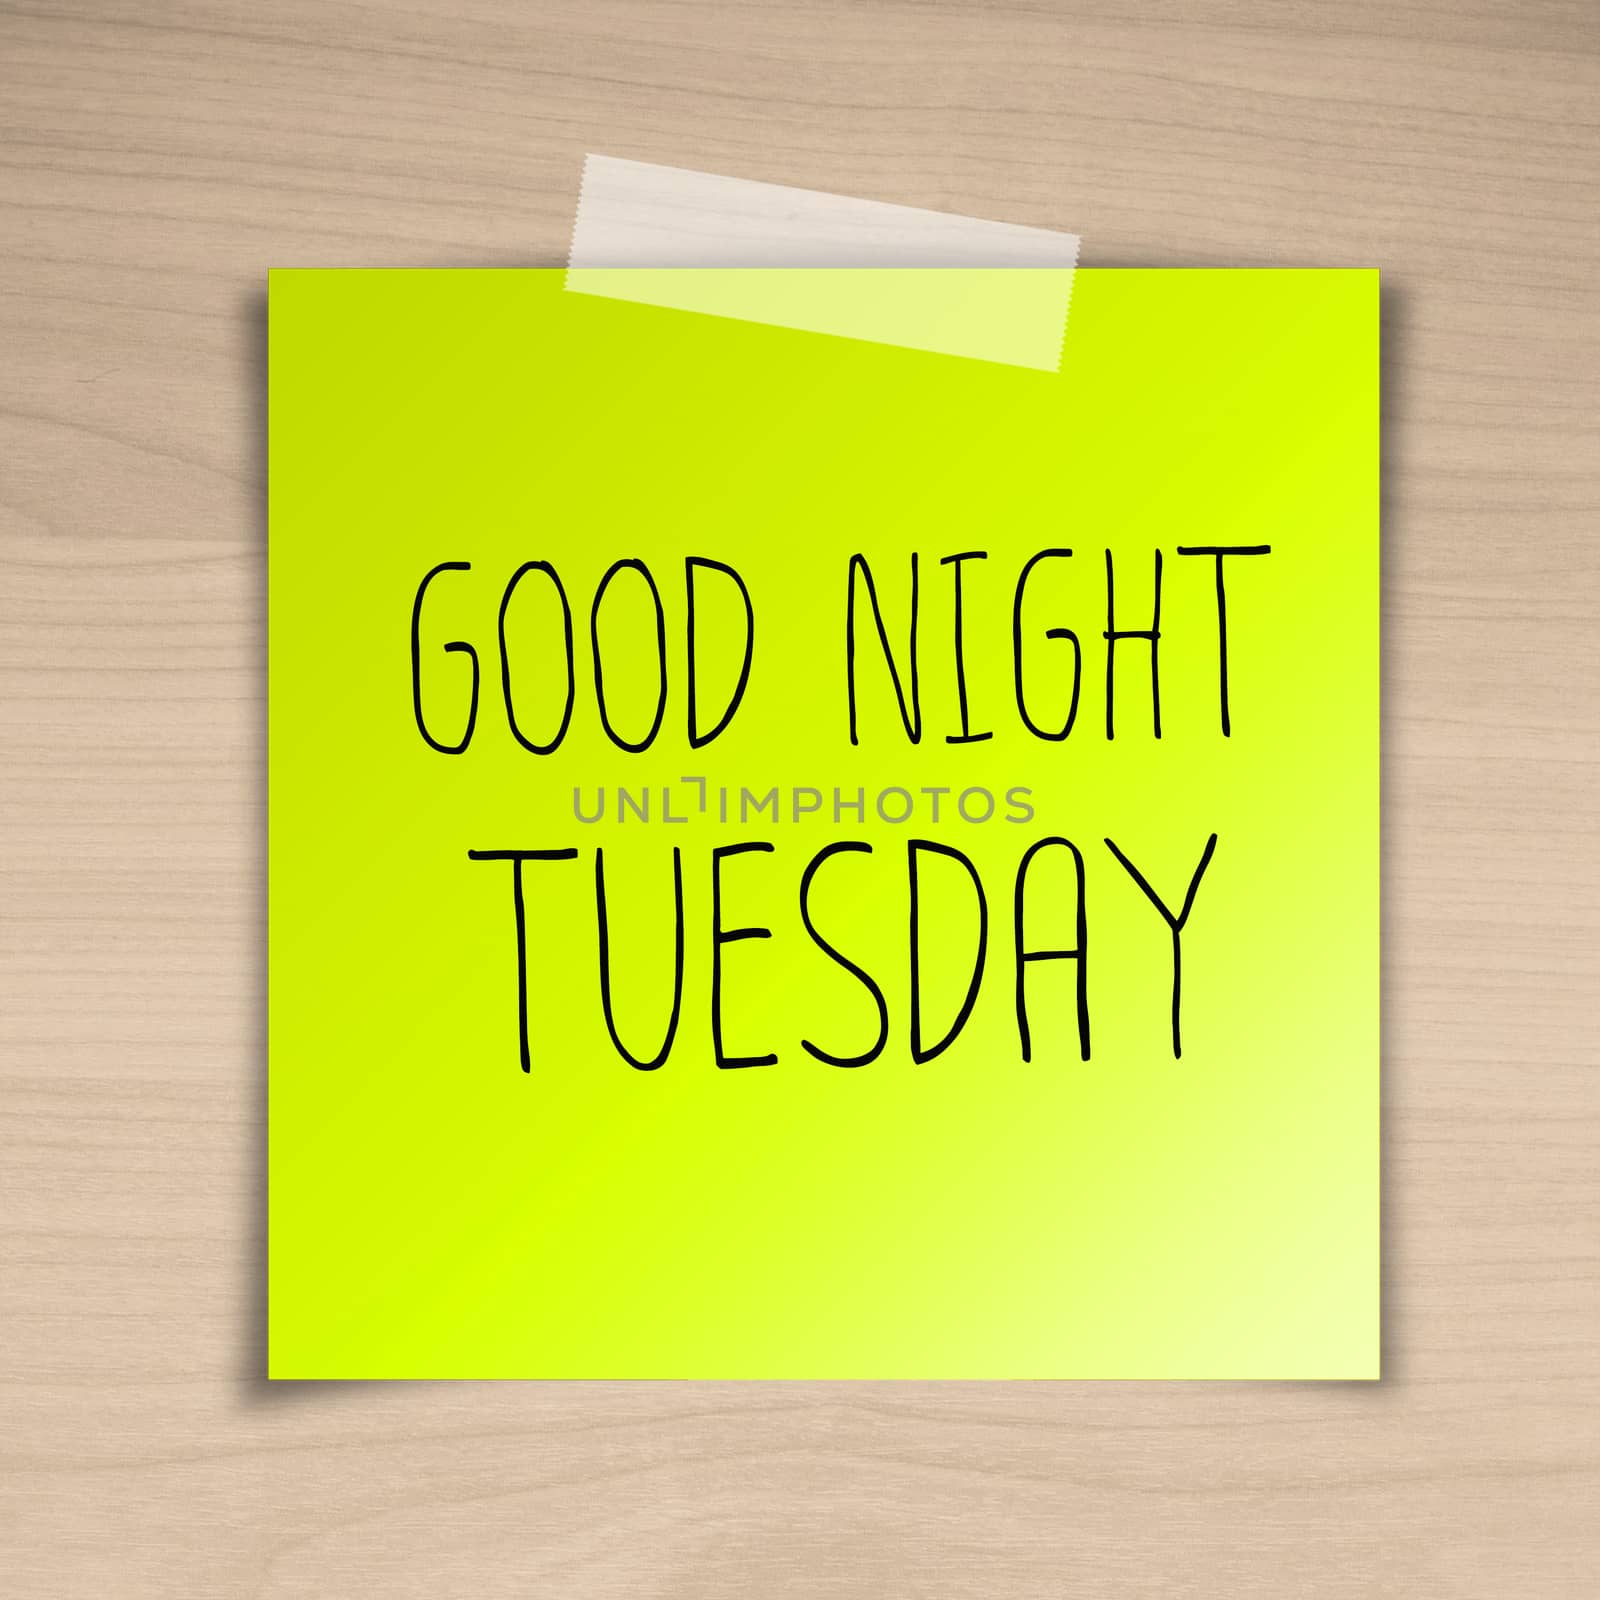 Good night tuesday sticky paper on brown wood background texture